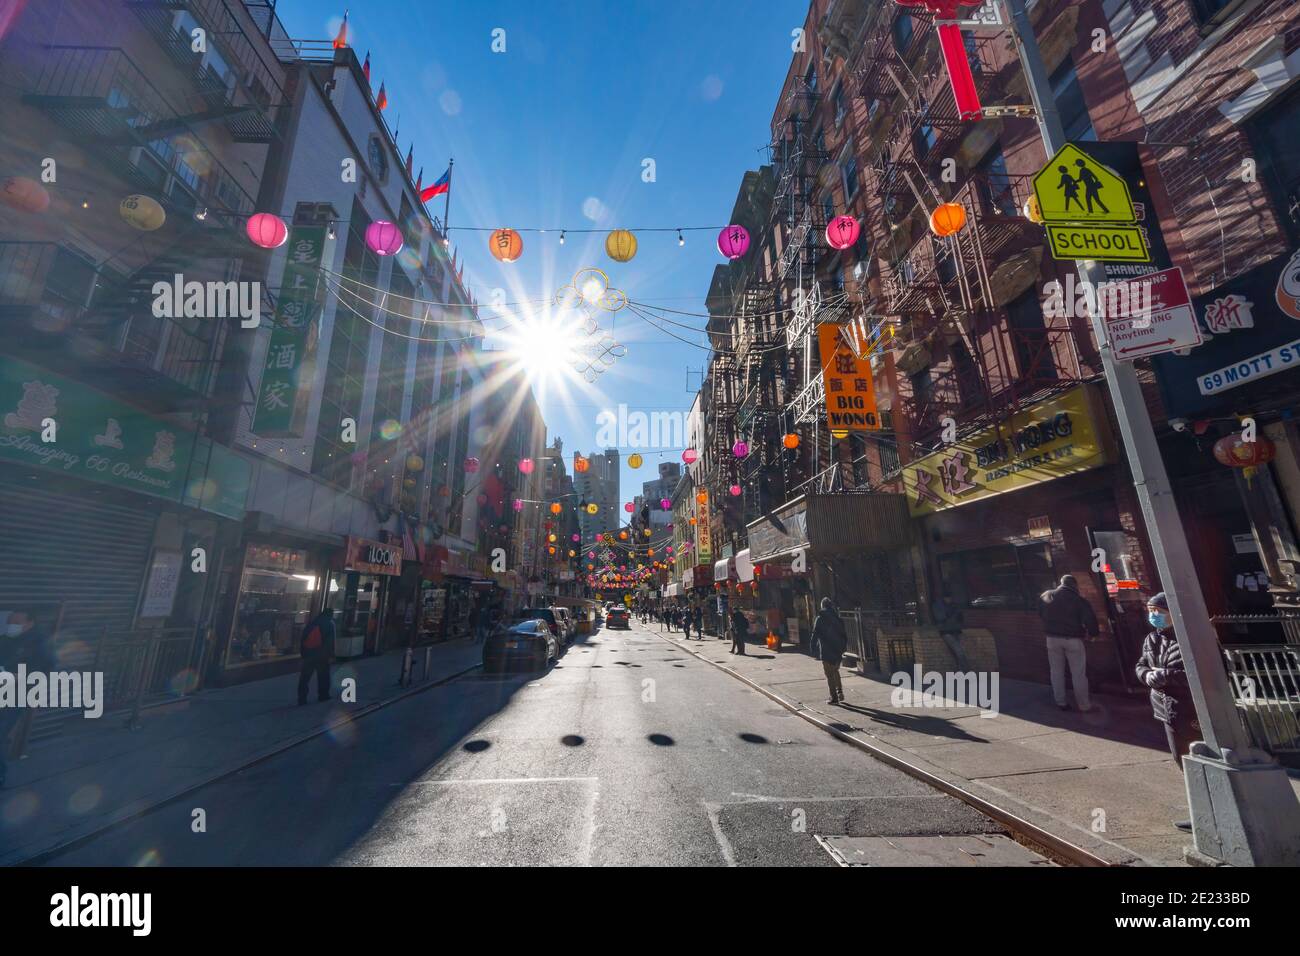 Chinatown is decorated with Paper lanterns for Chinese New Year 2021 at NYC. Stock Photo